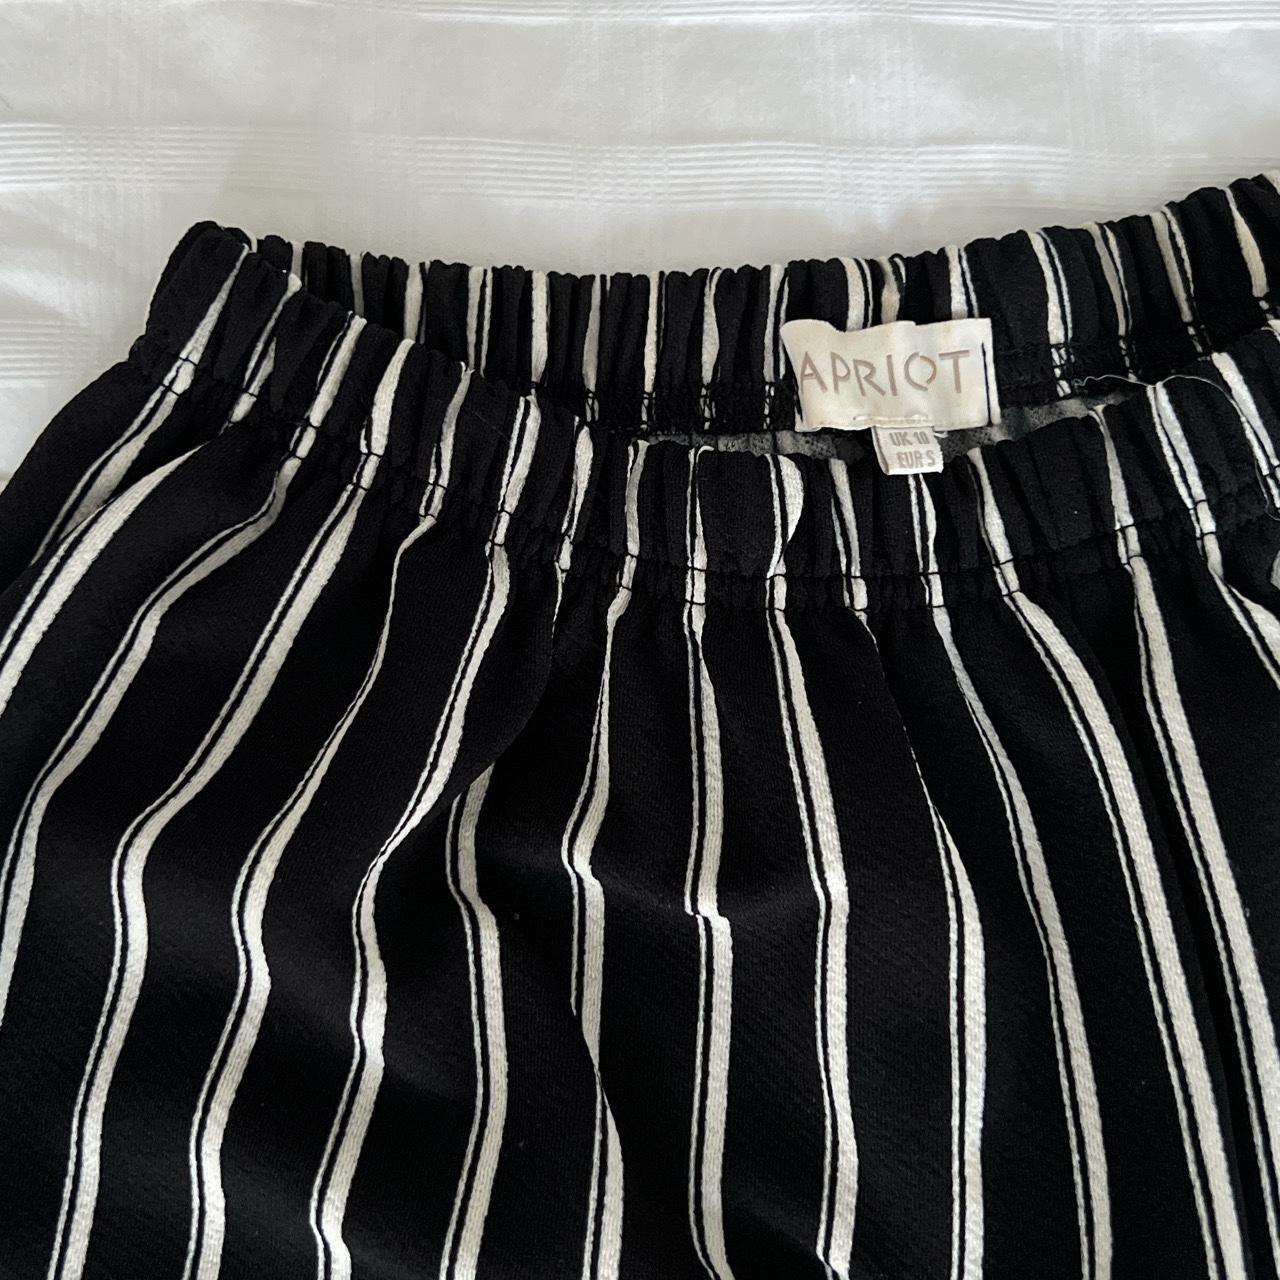 Product Image 3 - Apricot Black and White Striped